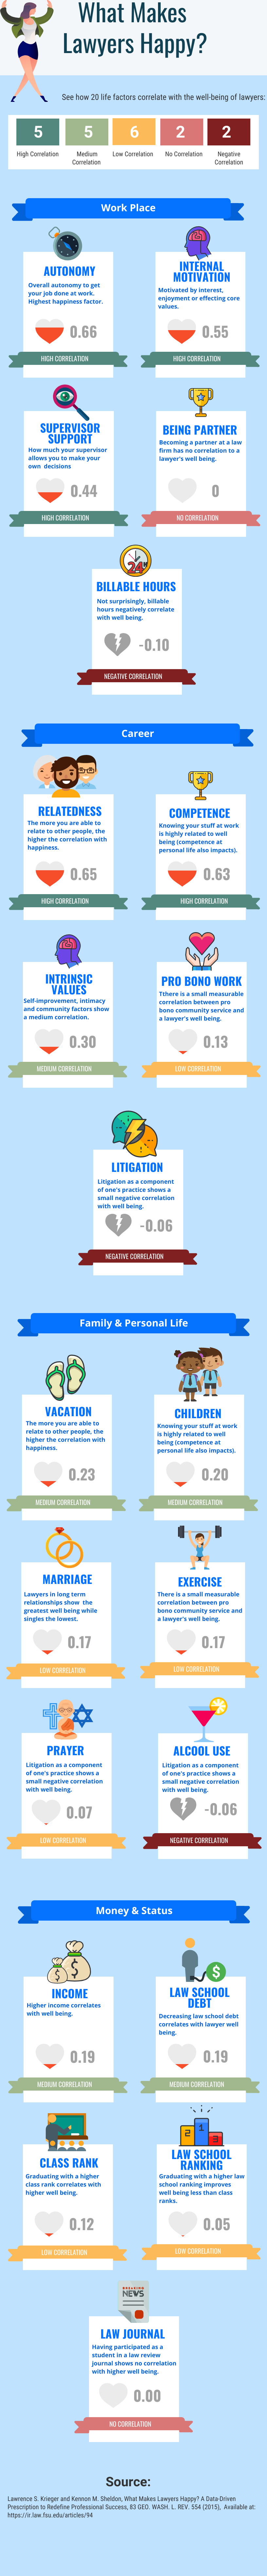 What Makes Attorneys Happy?